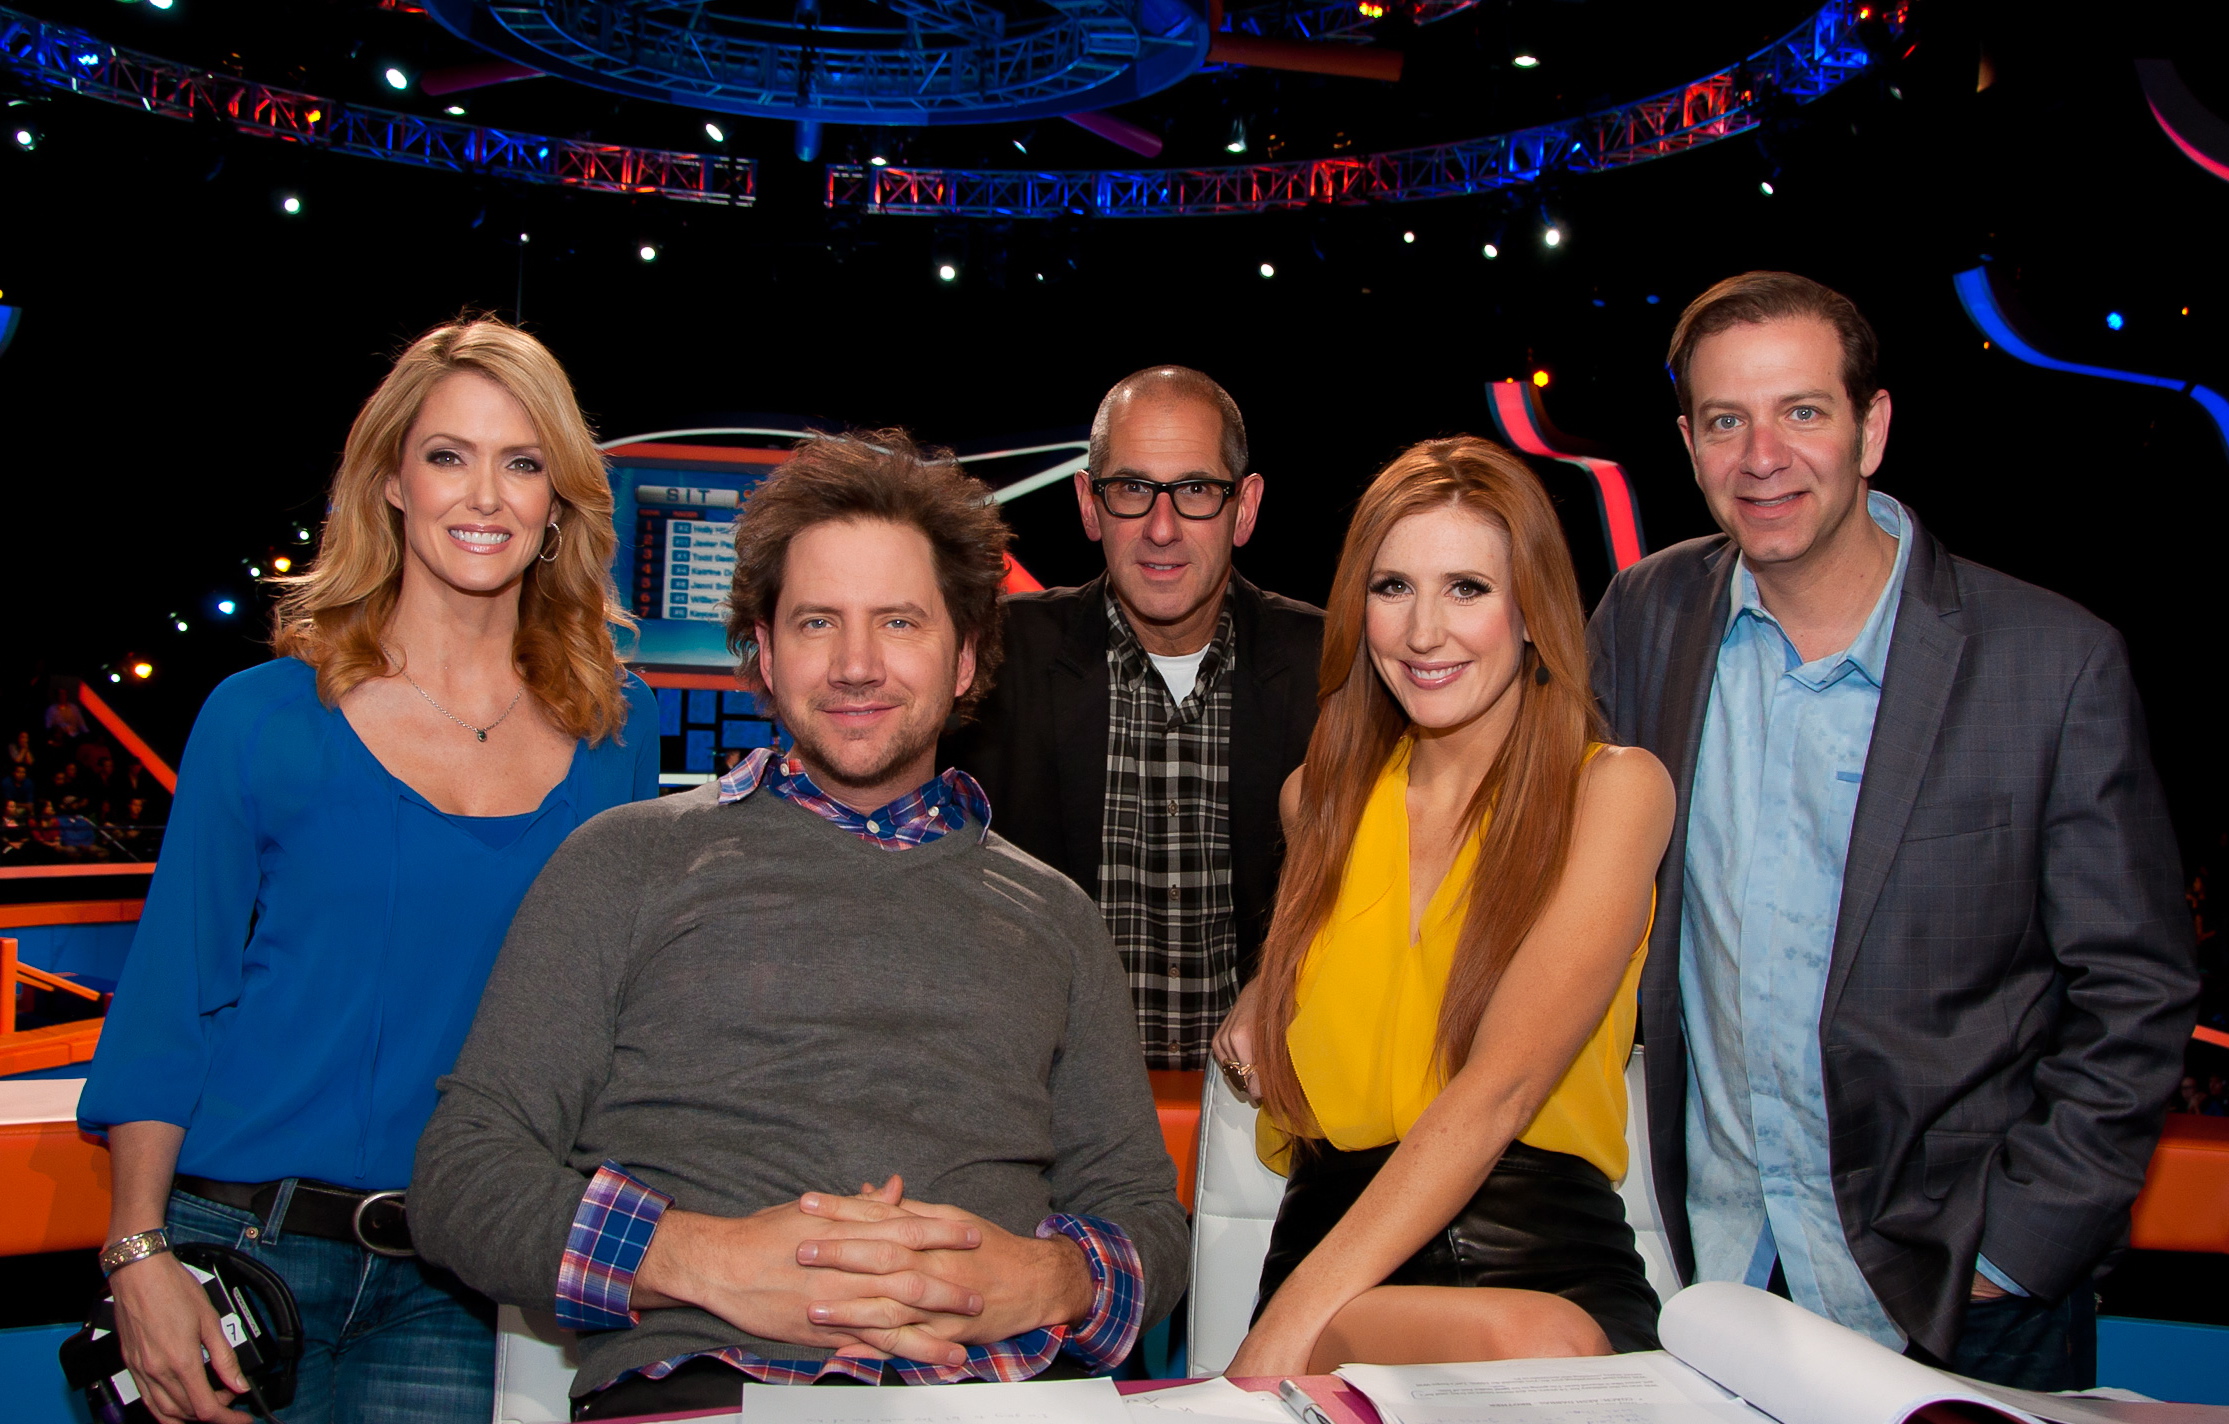 On set of the CW's Oh Sit! From left to right: Deena Dill (Creator, Executive Producer), Jamie Kennedy (Host), Phil Gurin (Creator, Executive Producer), Jessi Cruickshank (Host), Richard Joel (Creator, Executive Producer)